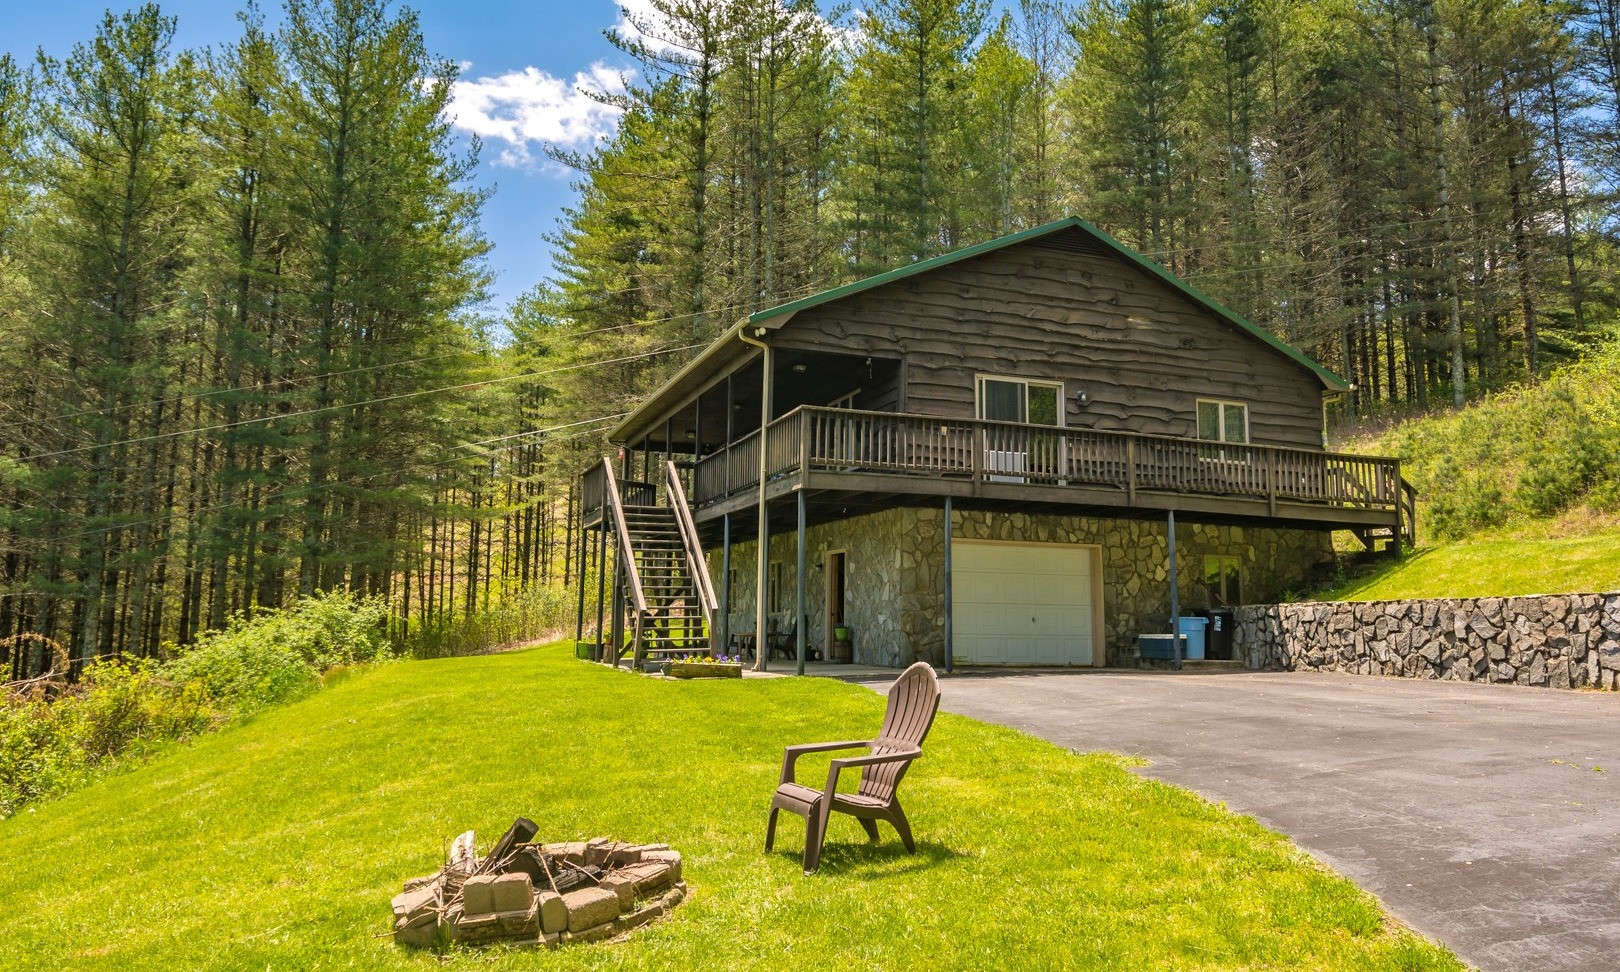 PRIVACY, ACREAGE, AND VIEWS!  What more can you ask for?  Put your own touches  and personality in this rustic NC Mountain home with potential long range mountain views and over 15 acres to explore, hike or hunt.